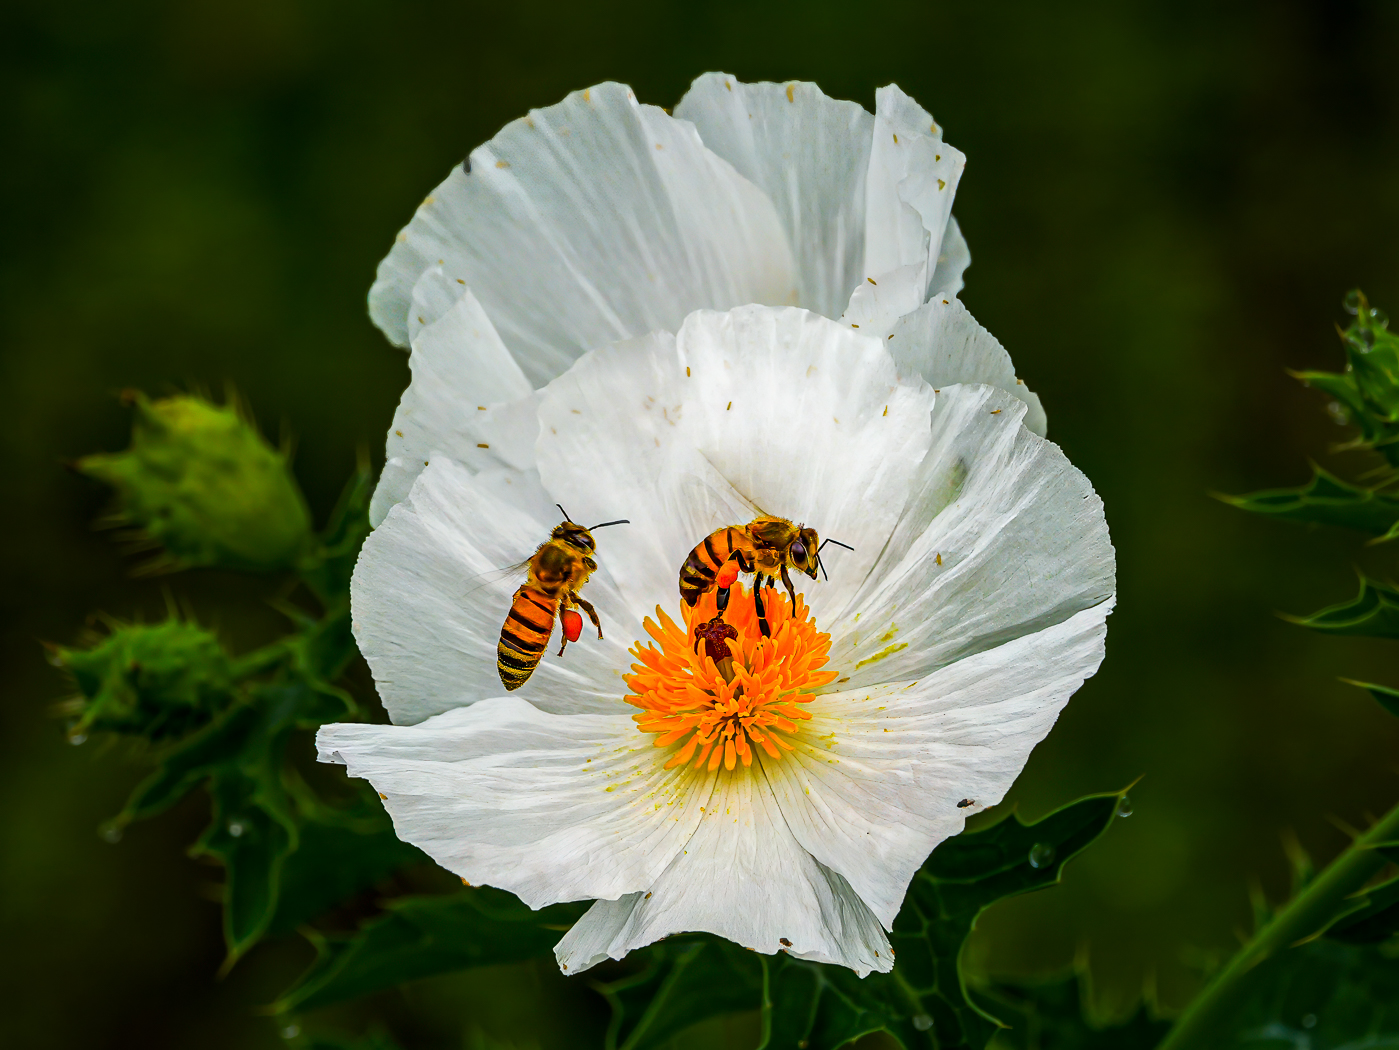 Busy Bees by Tom Lee